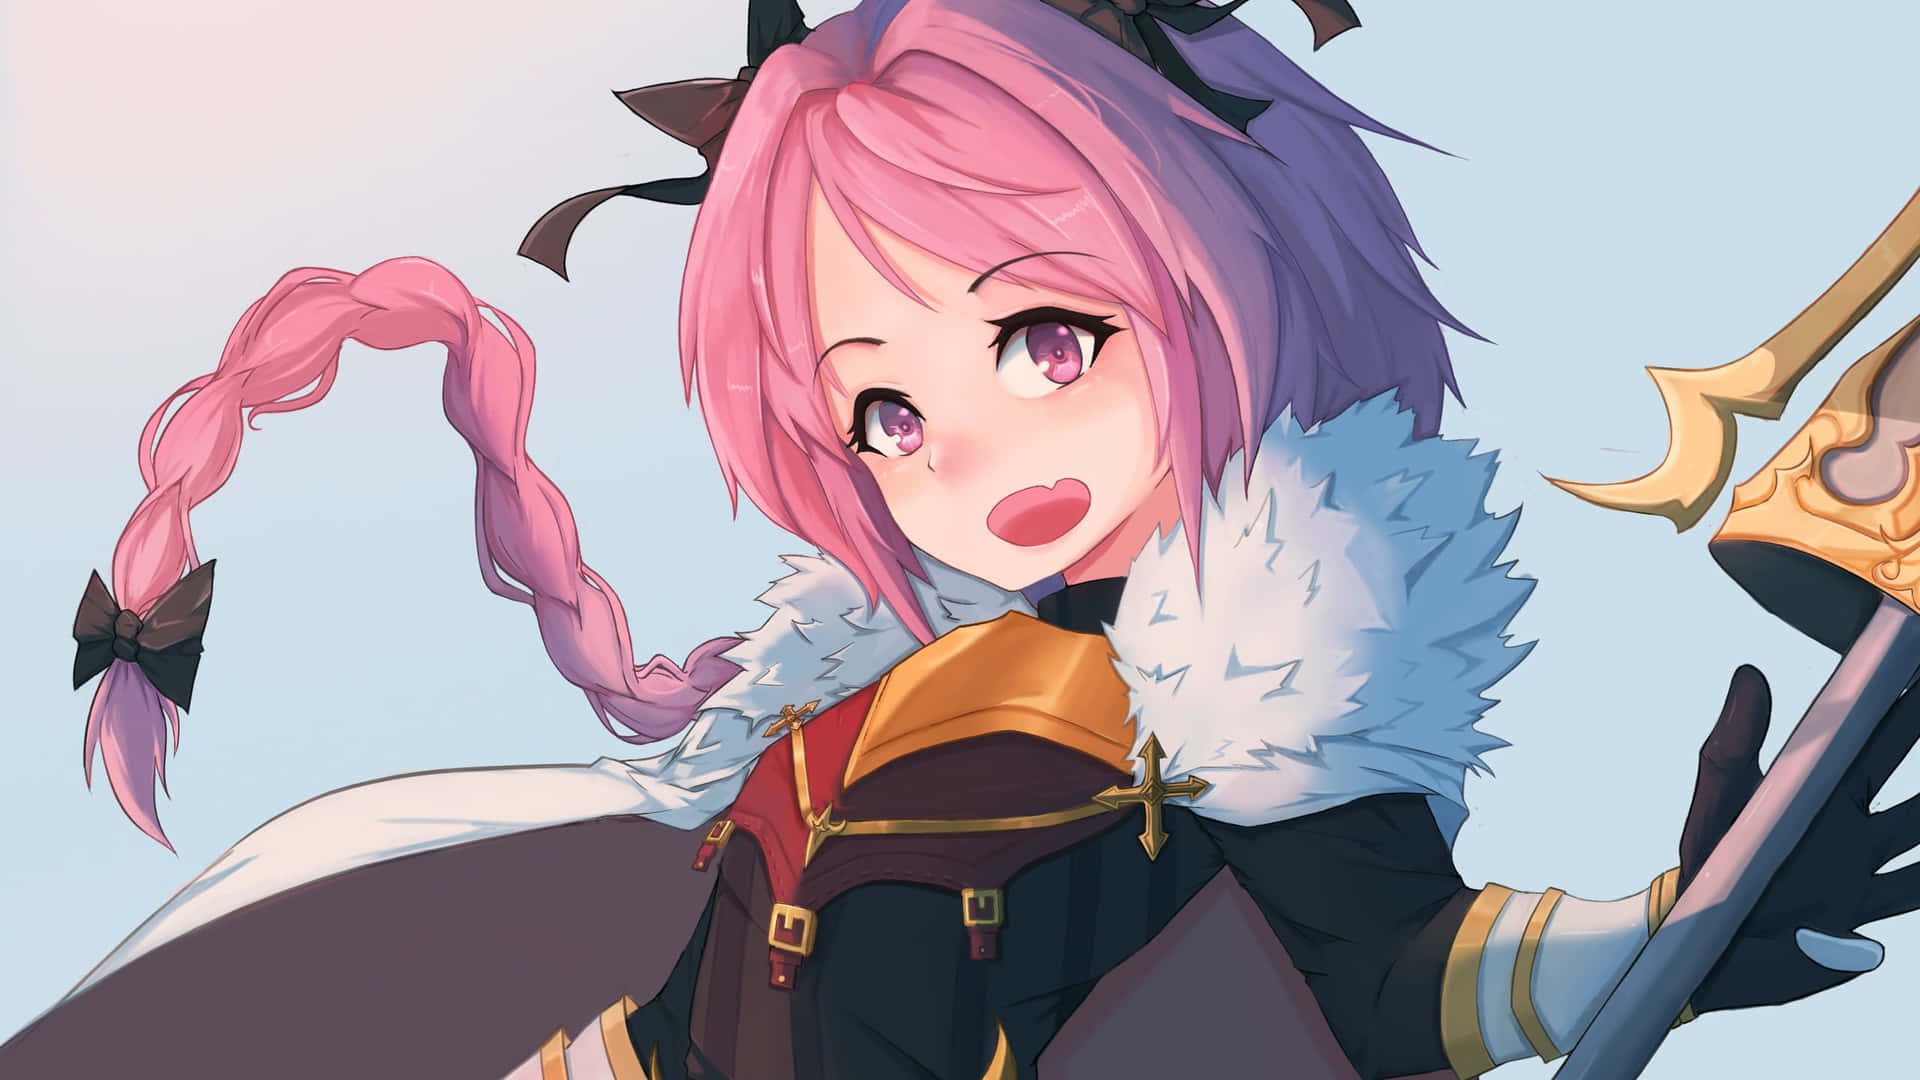 In Awe of Astolfo